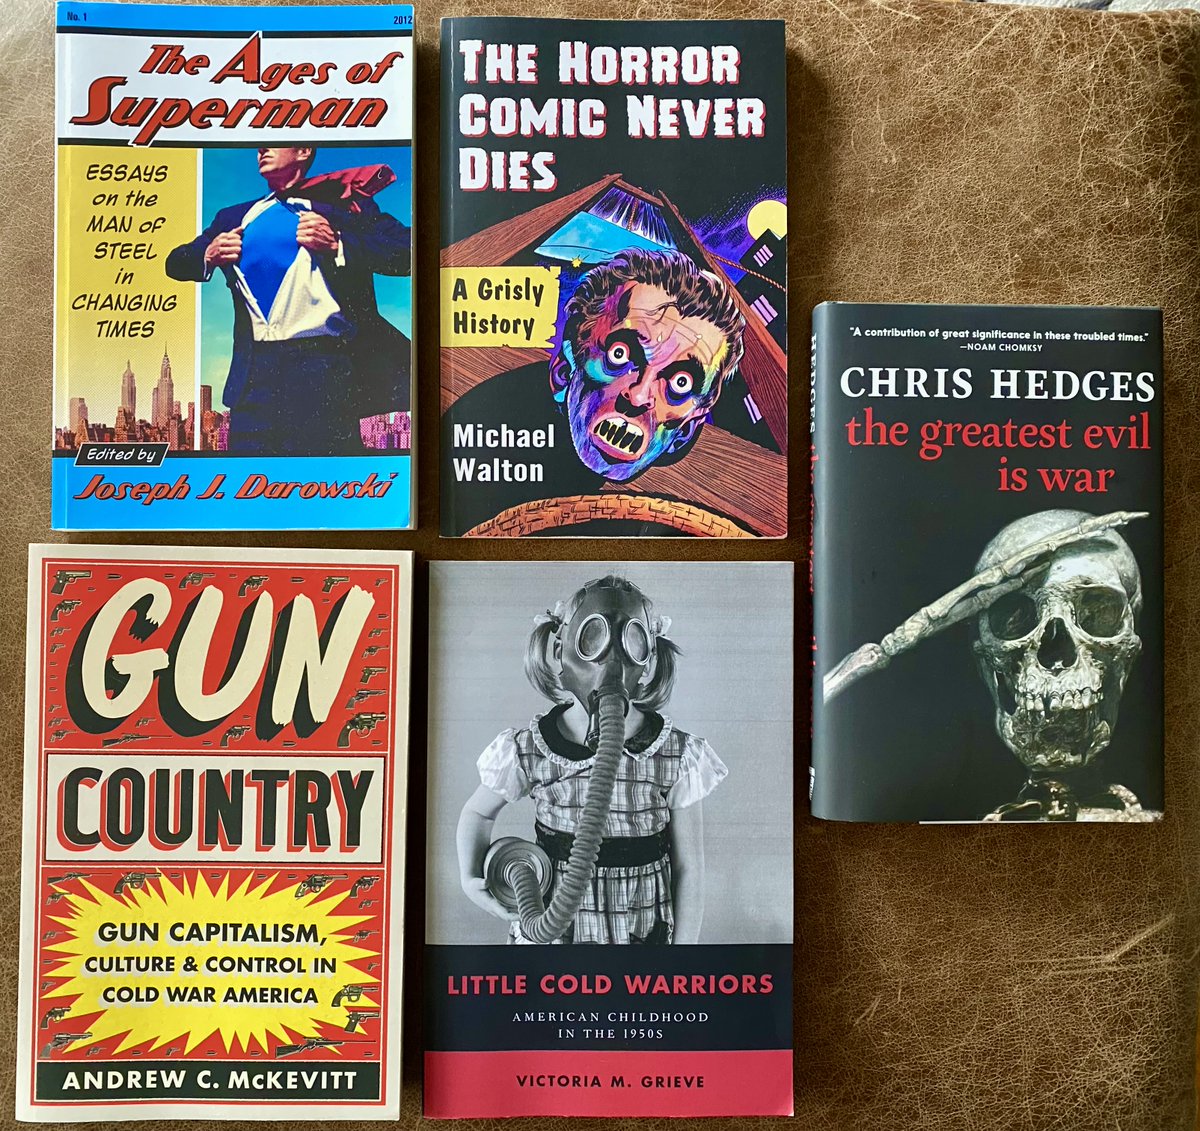 Next 5 down on the pro reading list. Prepping for next year's Cold War comics class w/ @JDarowski. Grieve is solid on politically mobilizing kids. @ChrisLynnHedges assails the 'pimps of war.' And @drewmckevitt is stellar! One of the very best reads this year. @UNC_Press is 🔥!